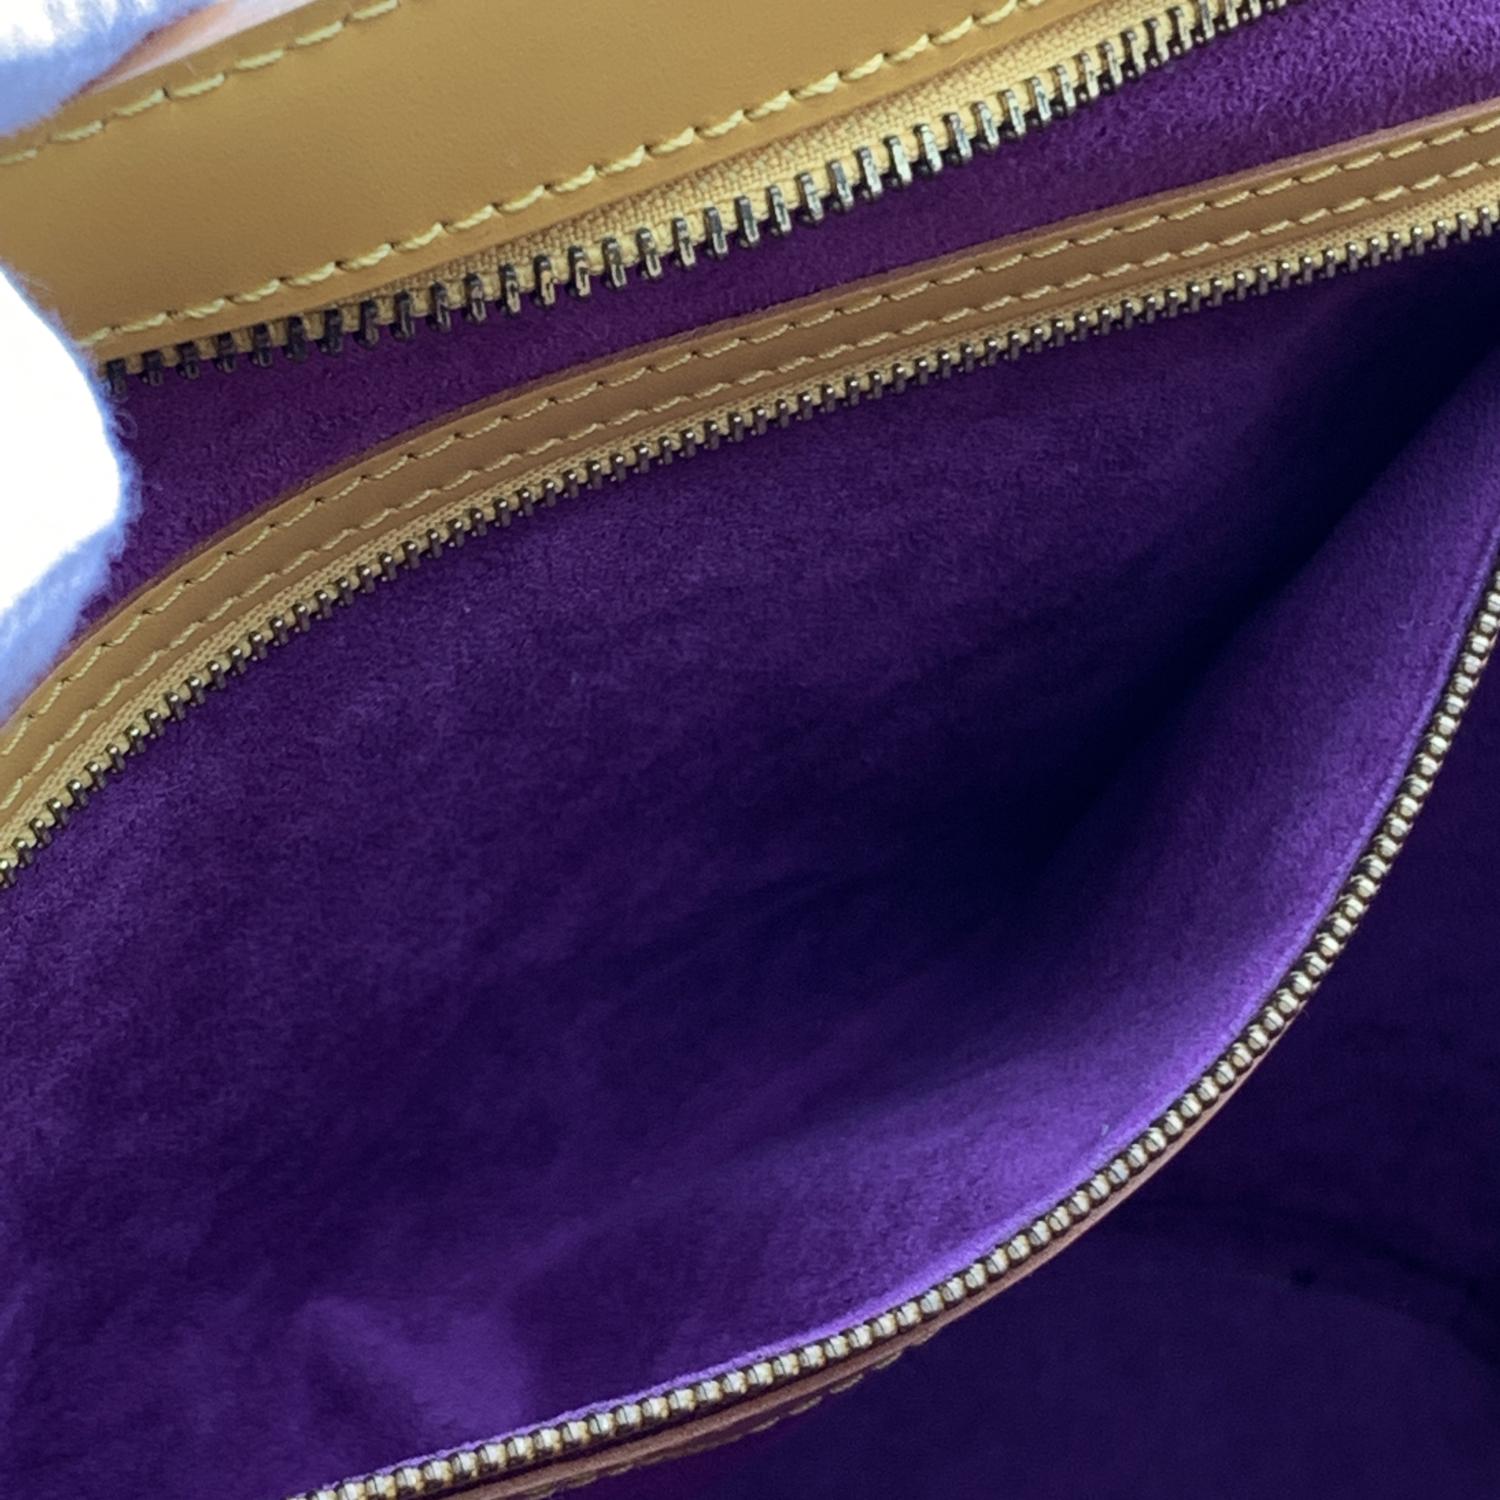 Sophisticated 'Saint Jacques GM' Shoulder Bag by LOUIS VUITTON, crafted in yellow EPI leather. The bag features a large main compartment with upper zipper closure. Purple microfiber internal lining with 1 side zip pocket inside. 'LOUIS VUITTON Paris